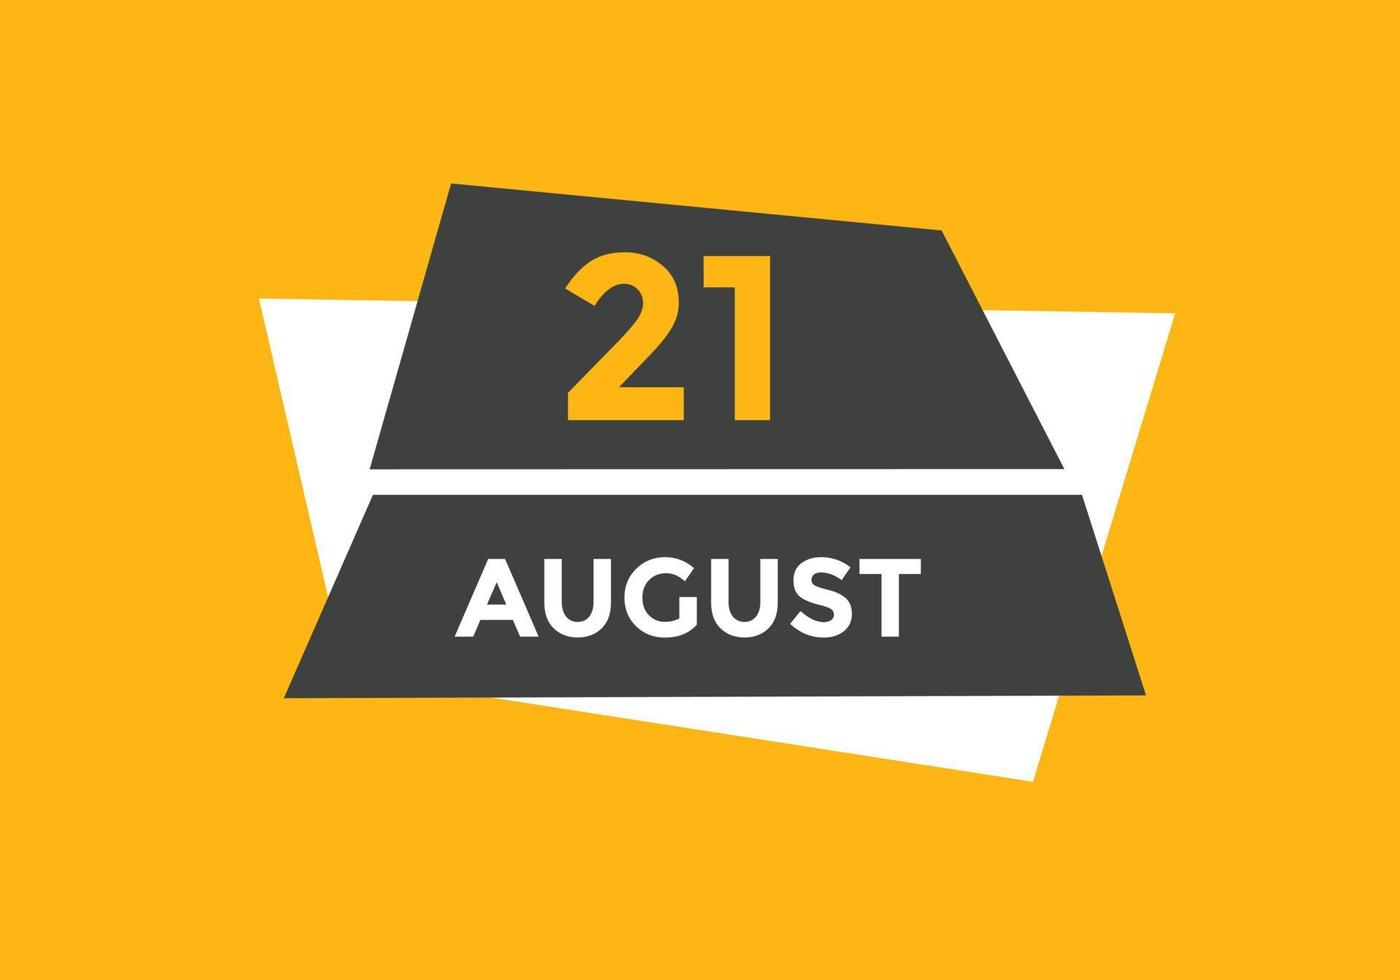 august 21 calendar reminder. 21th august daily calendar icon template. Calendar 21th august icon Design template. Vector illustration